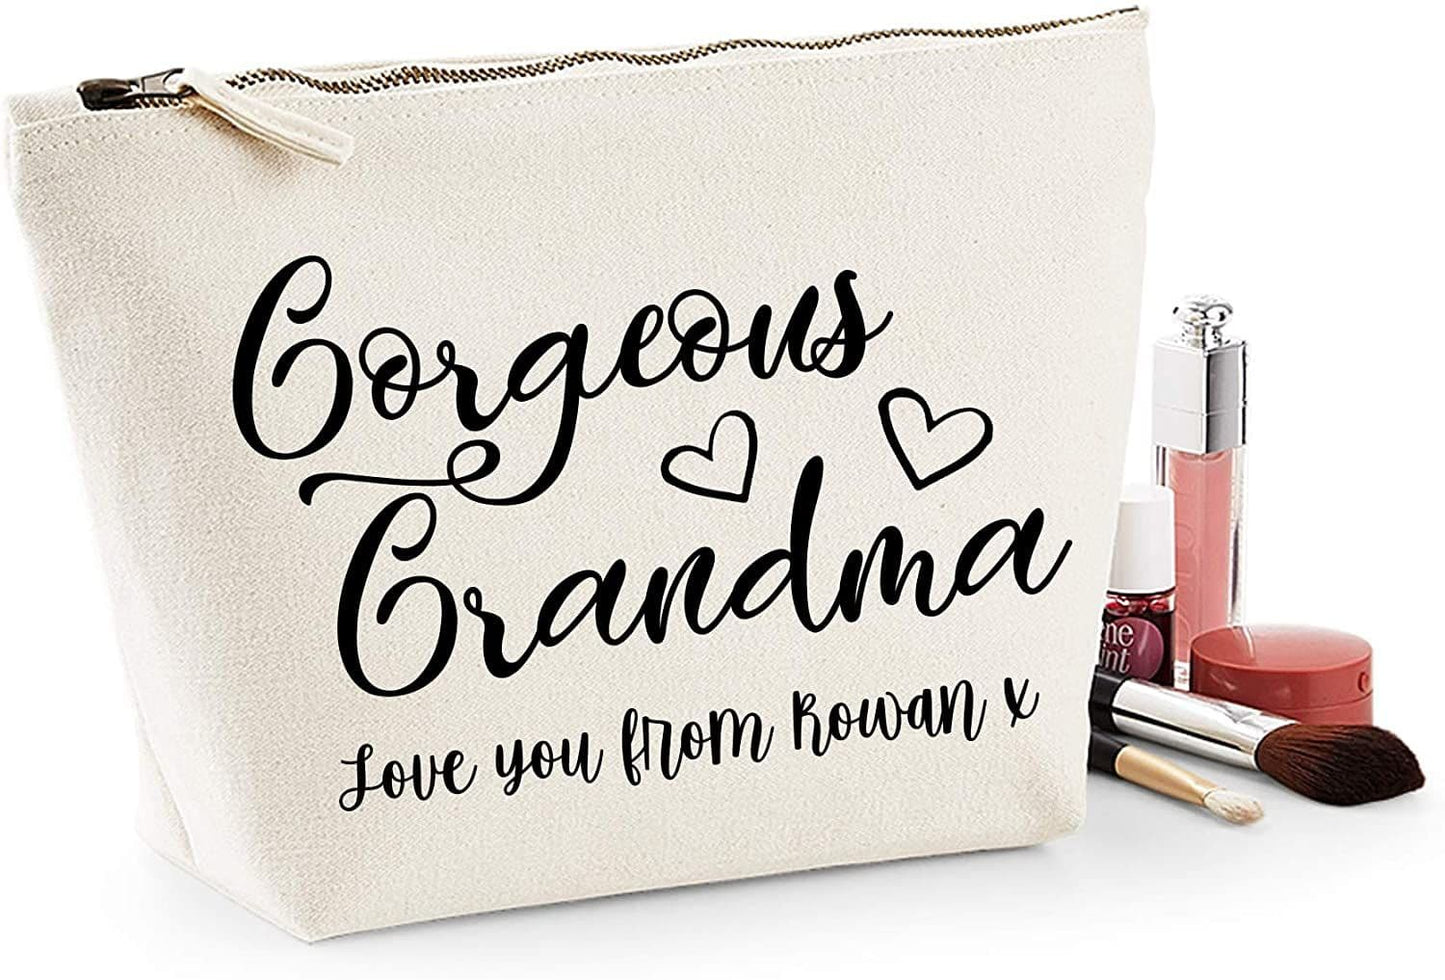 'Gorgeous Grandma' Any Message Natural Cotton Make-Up Bag Personalised